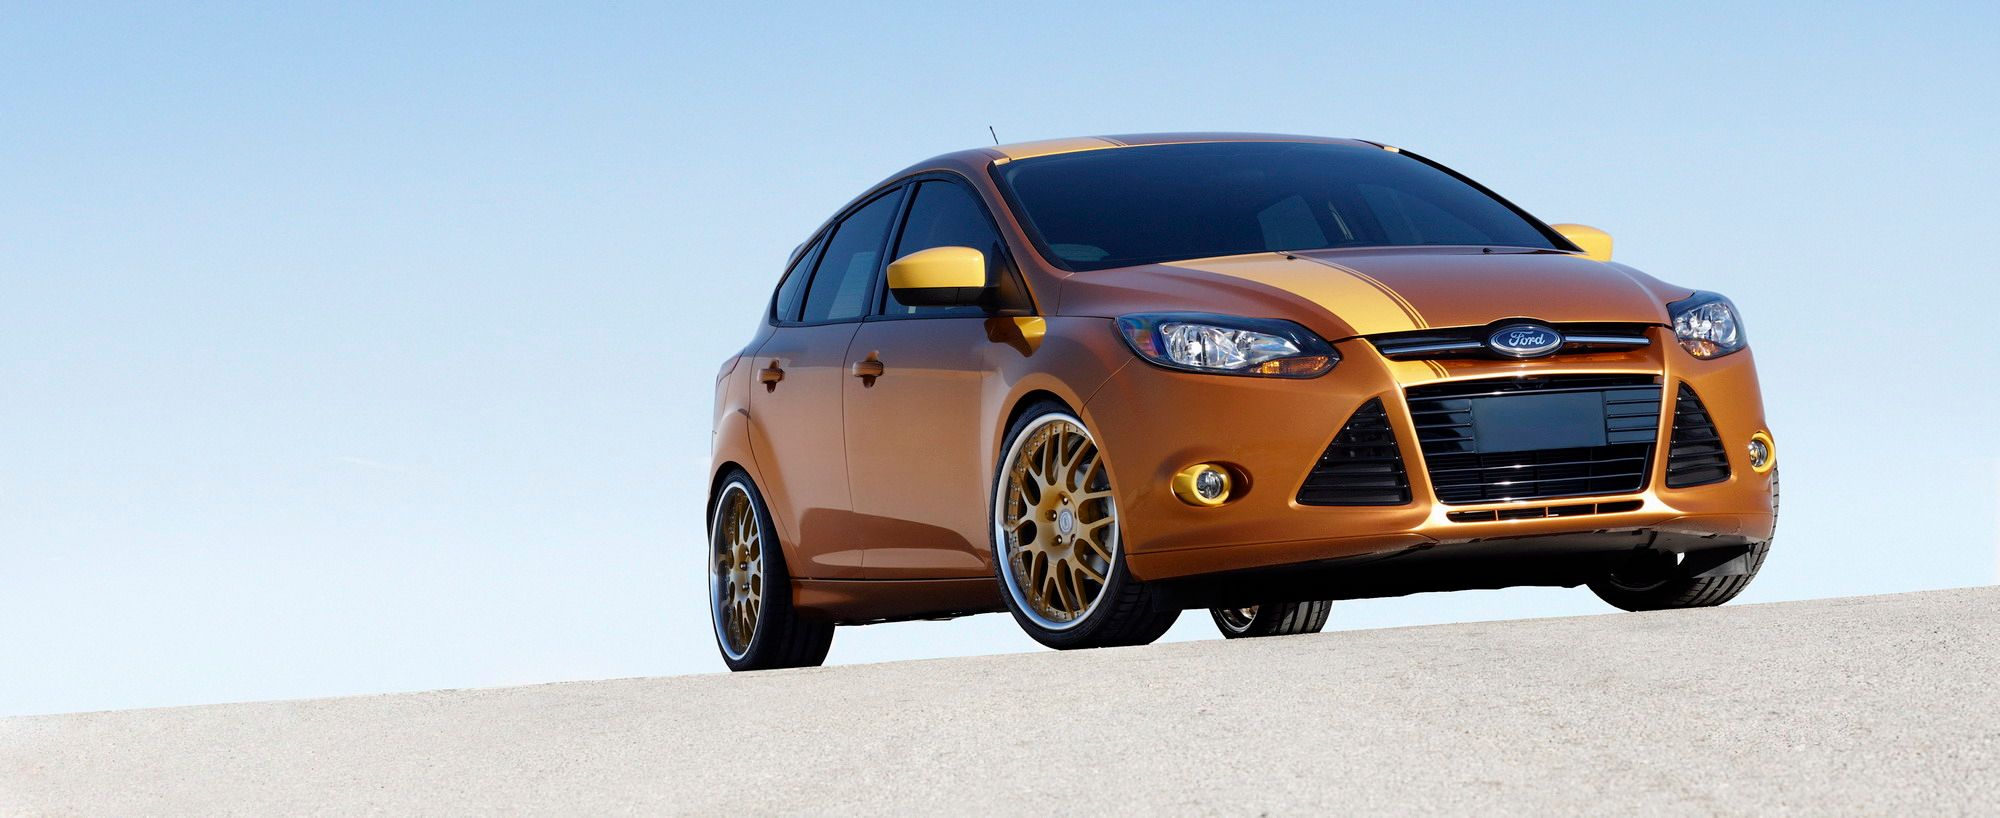 2012 Ford Focus by FSWerks